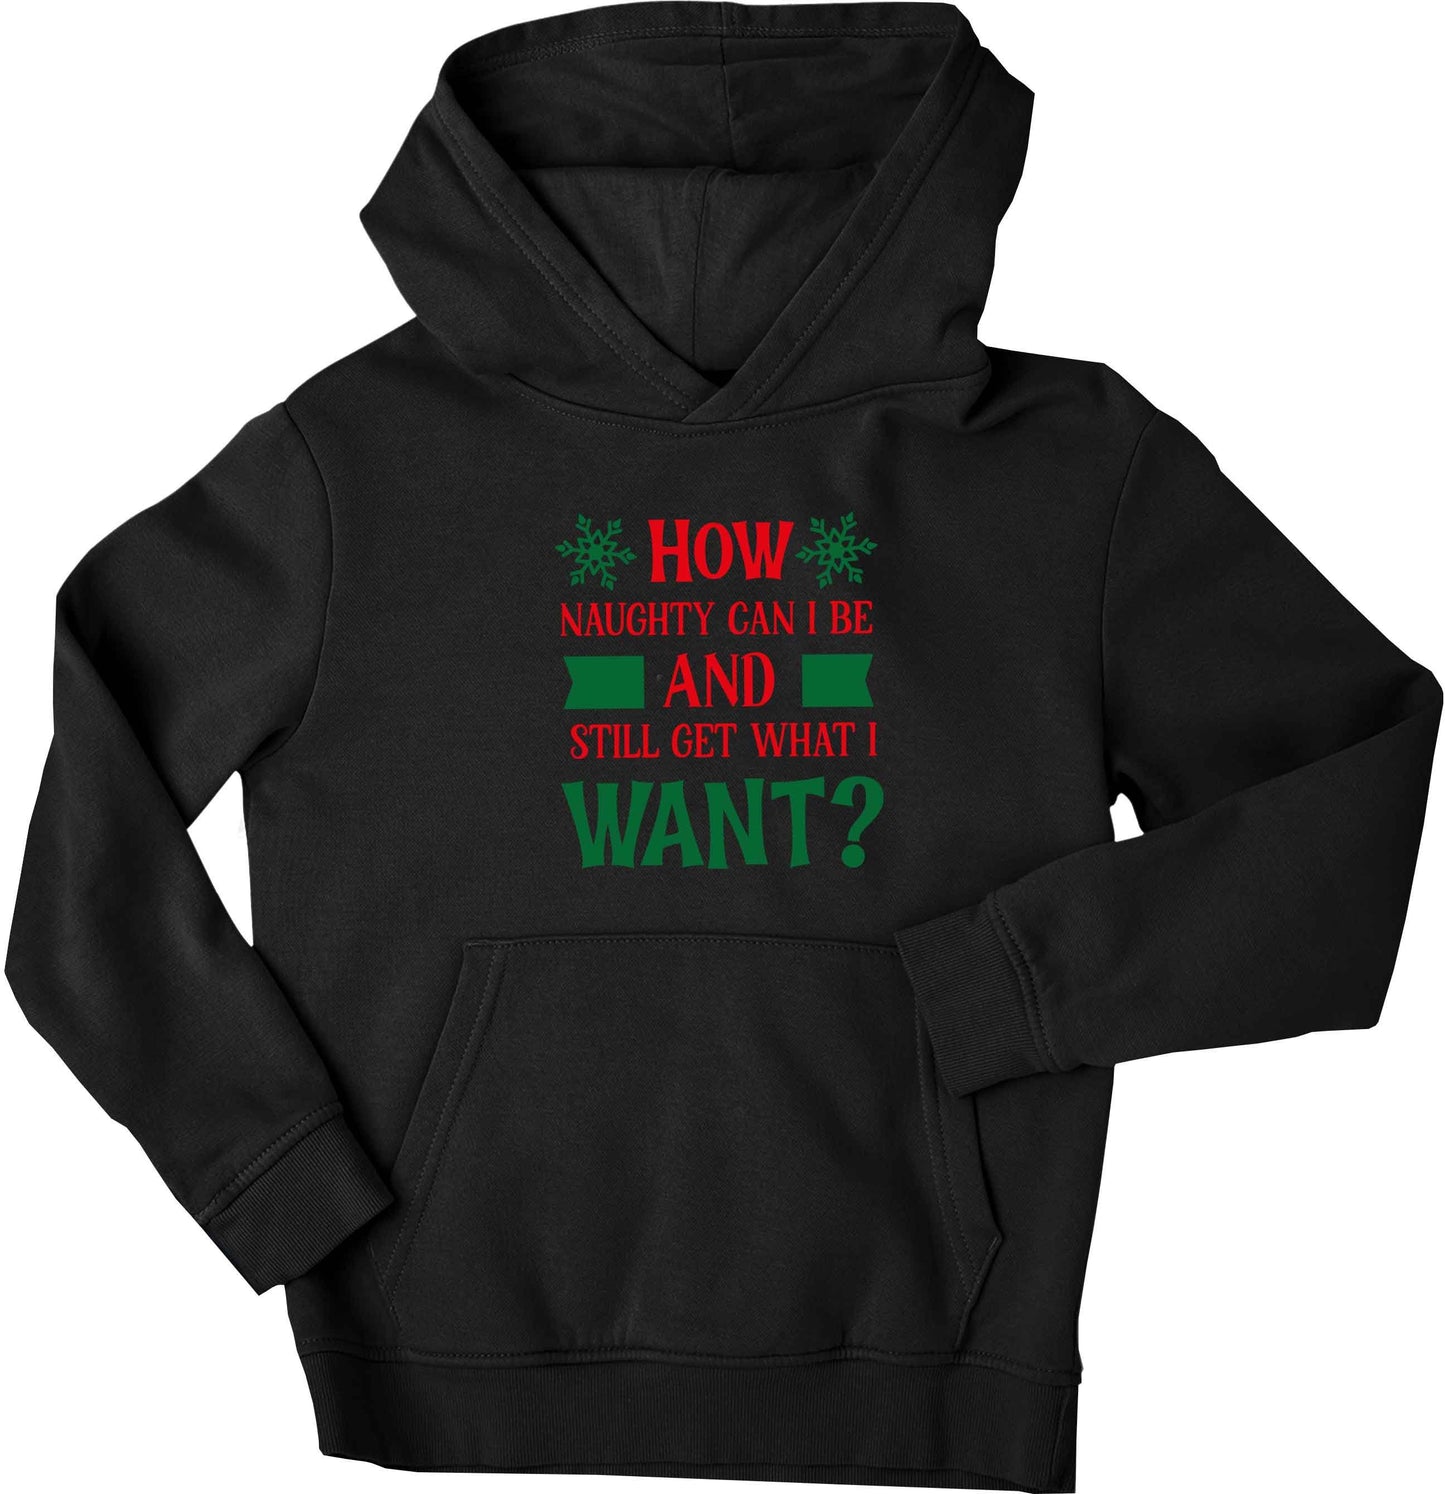 How naughty can I be and still get what I want? children's black hoodie 12-13 Years